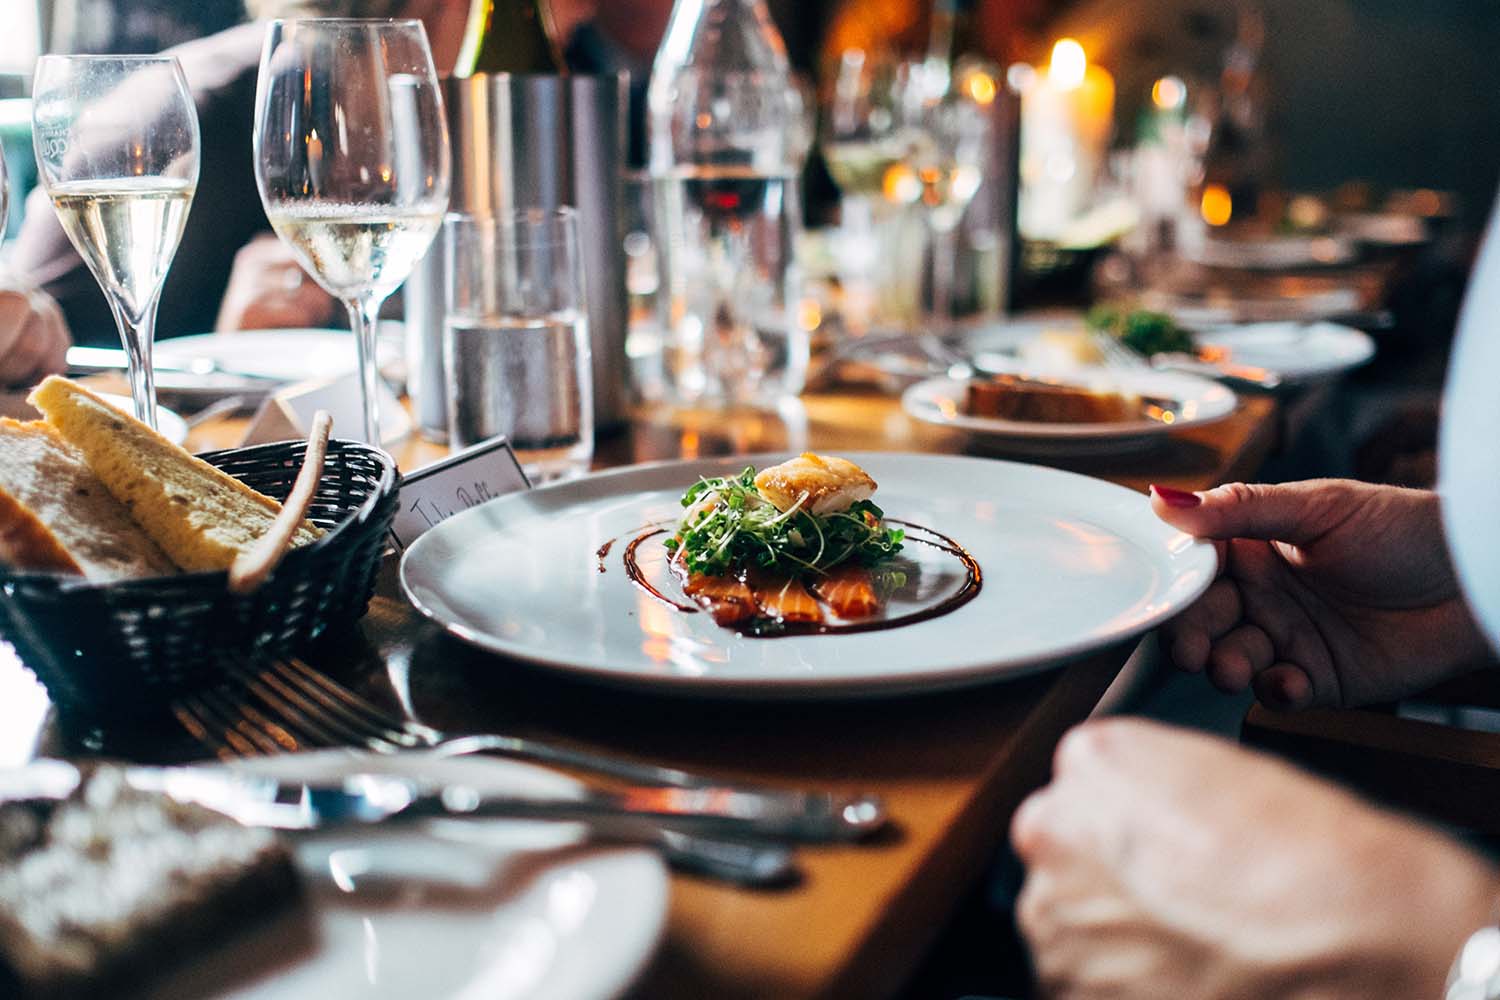 Things to Consider When Choosing a Restaurant